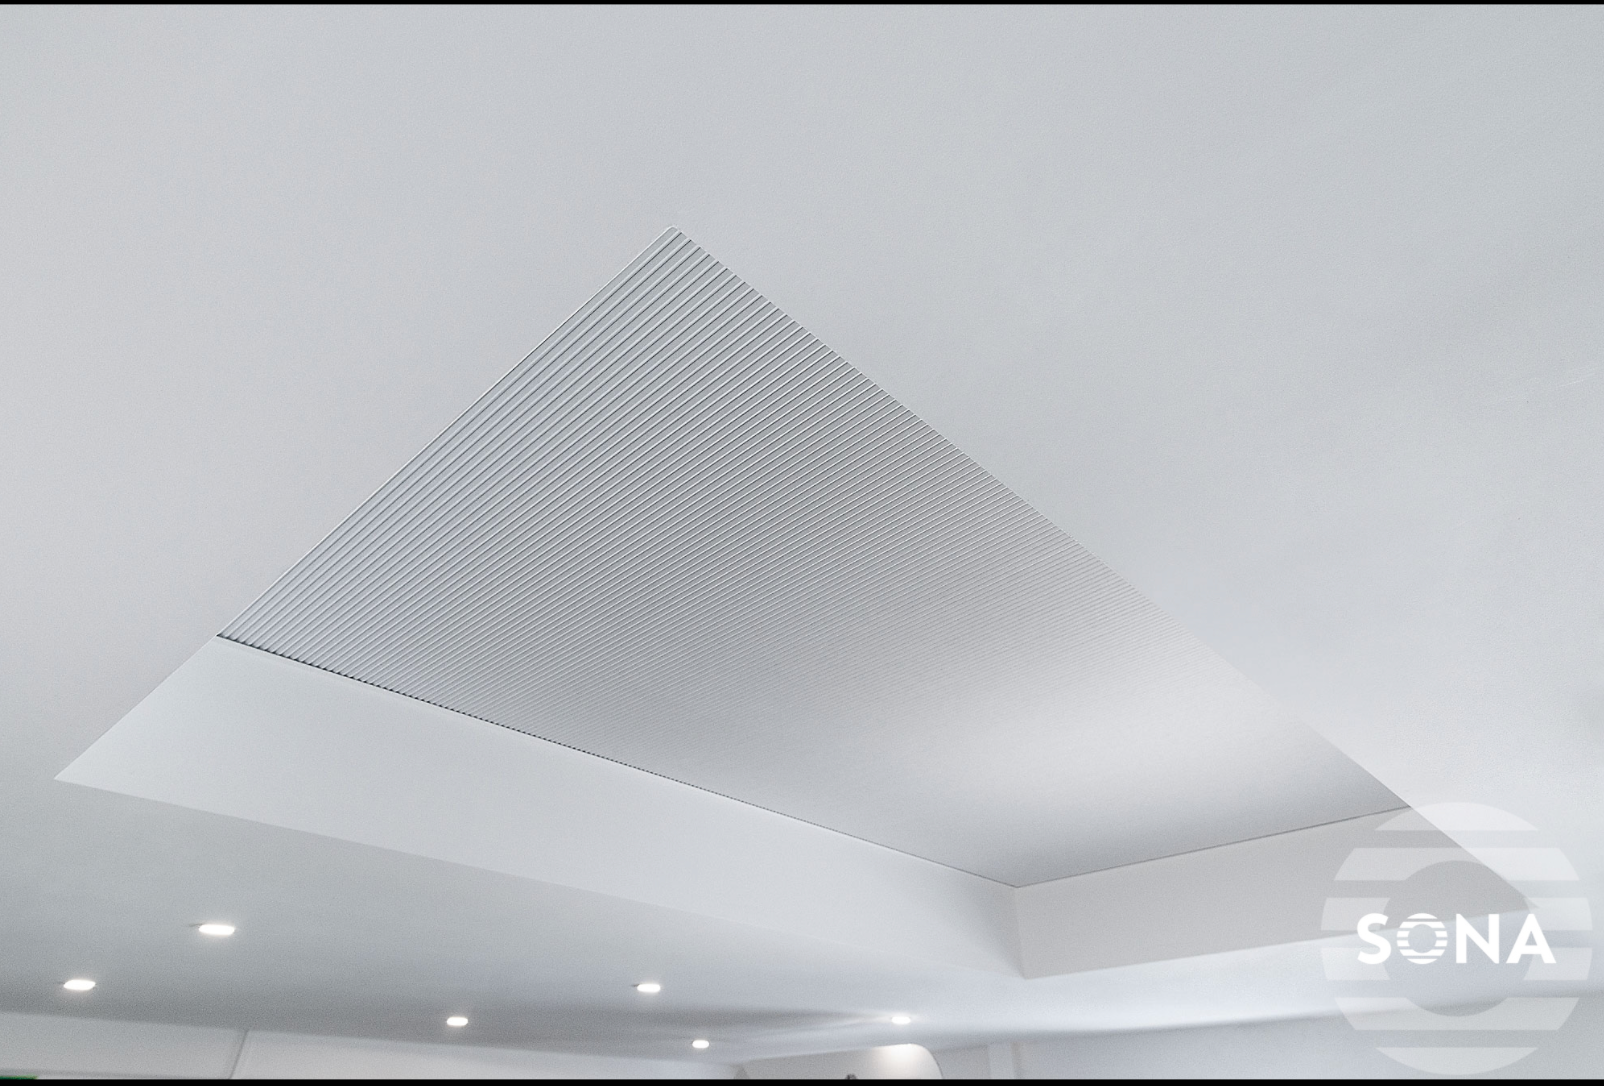 Electric Blinds for Flat & Pitched Roof Skylight 800x1800mm